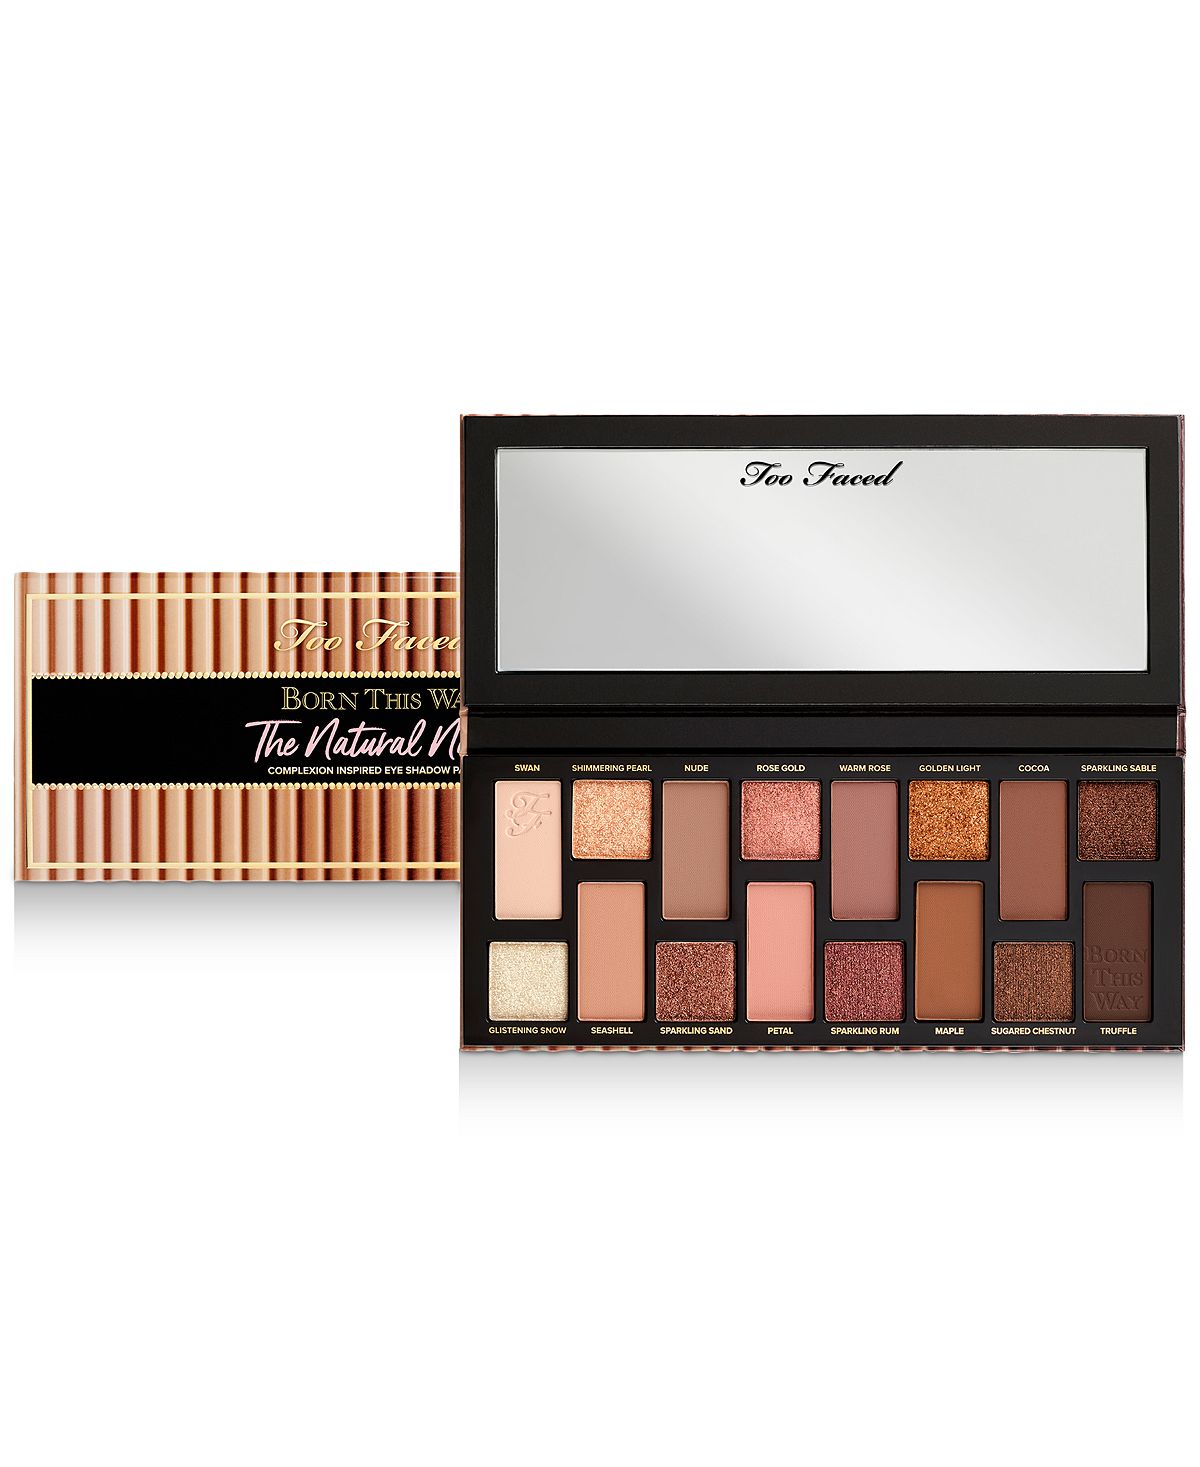 Too Faced - Born This Way The Natural Nudes Eye Shadow Palette